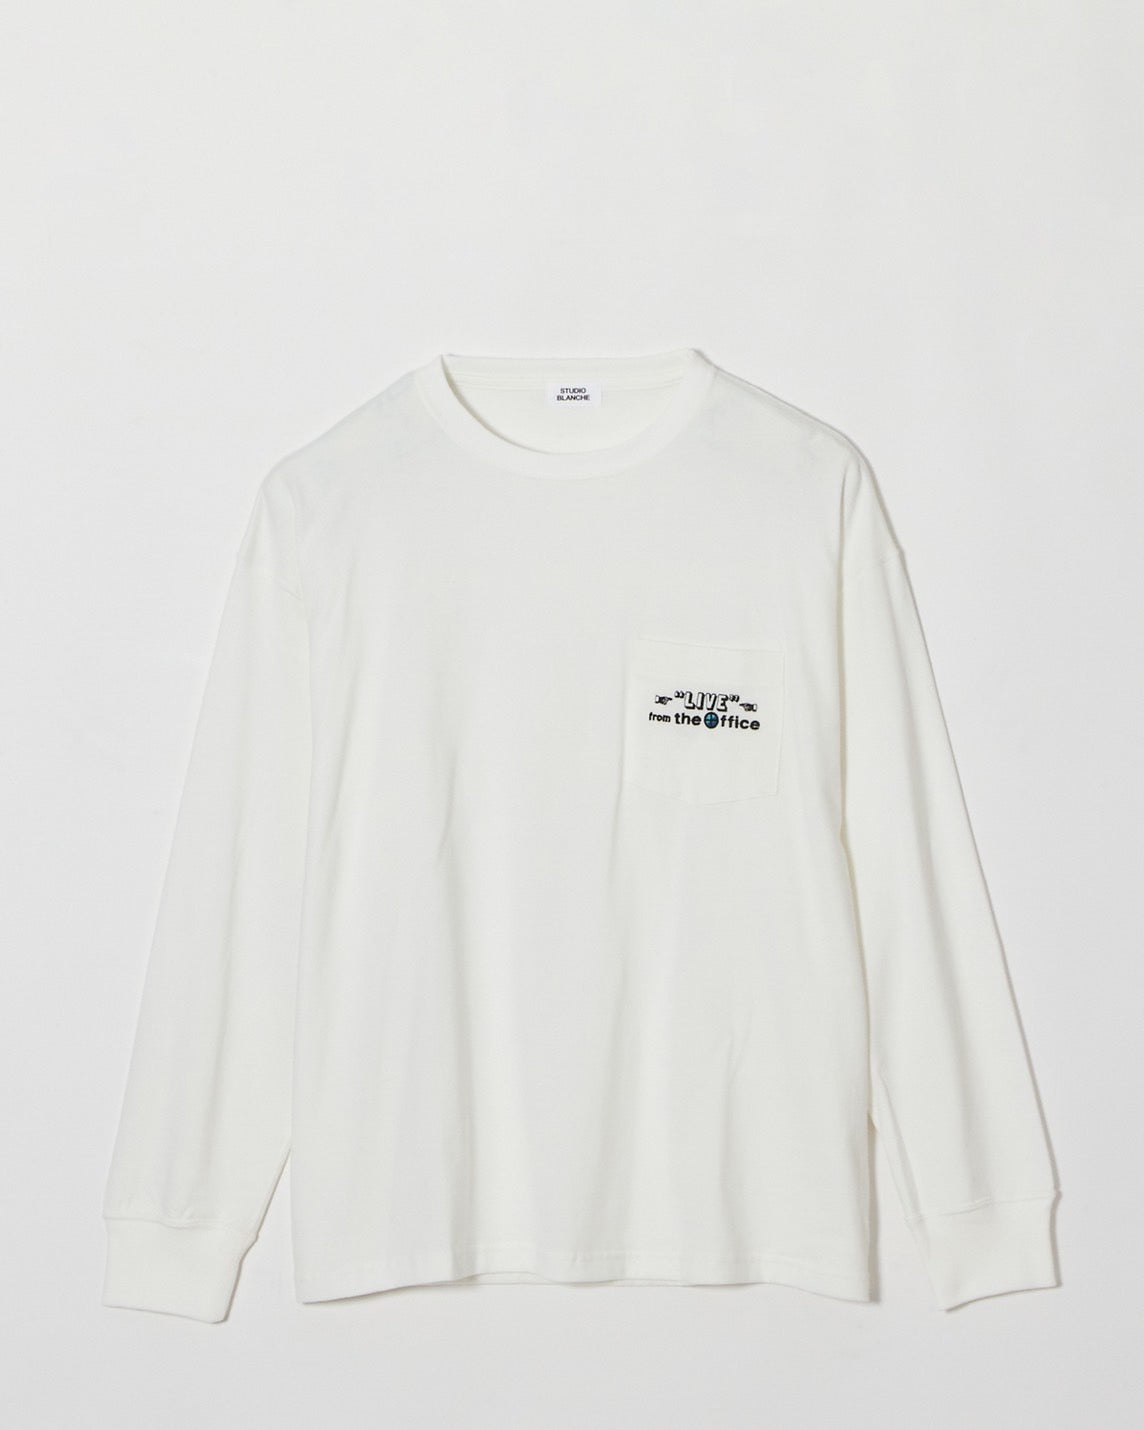 LIVEFROMTHE Office　L/S T-SHIRT